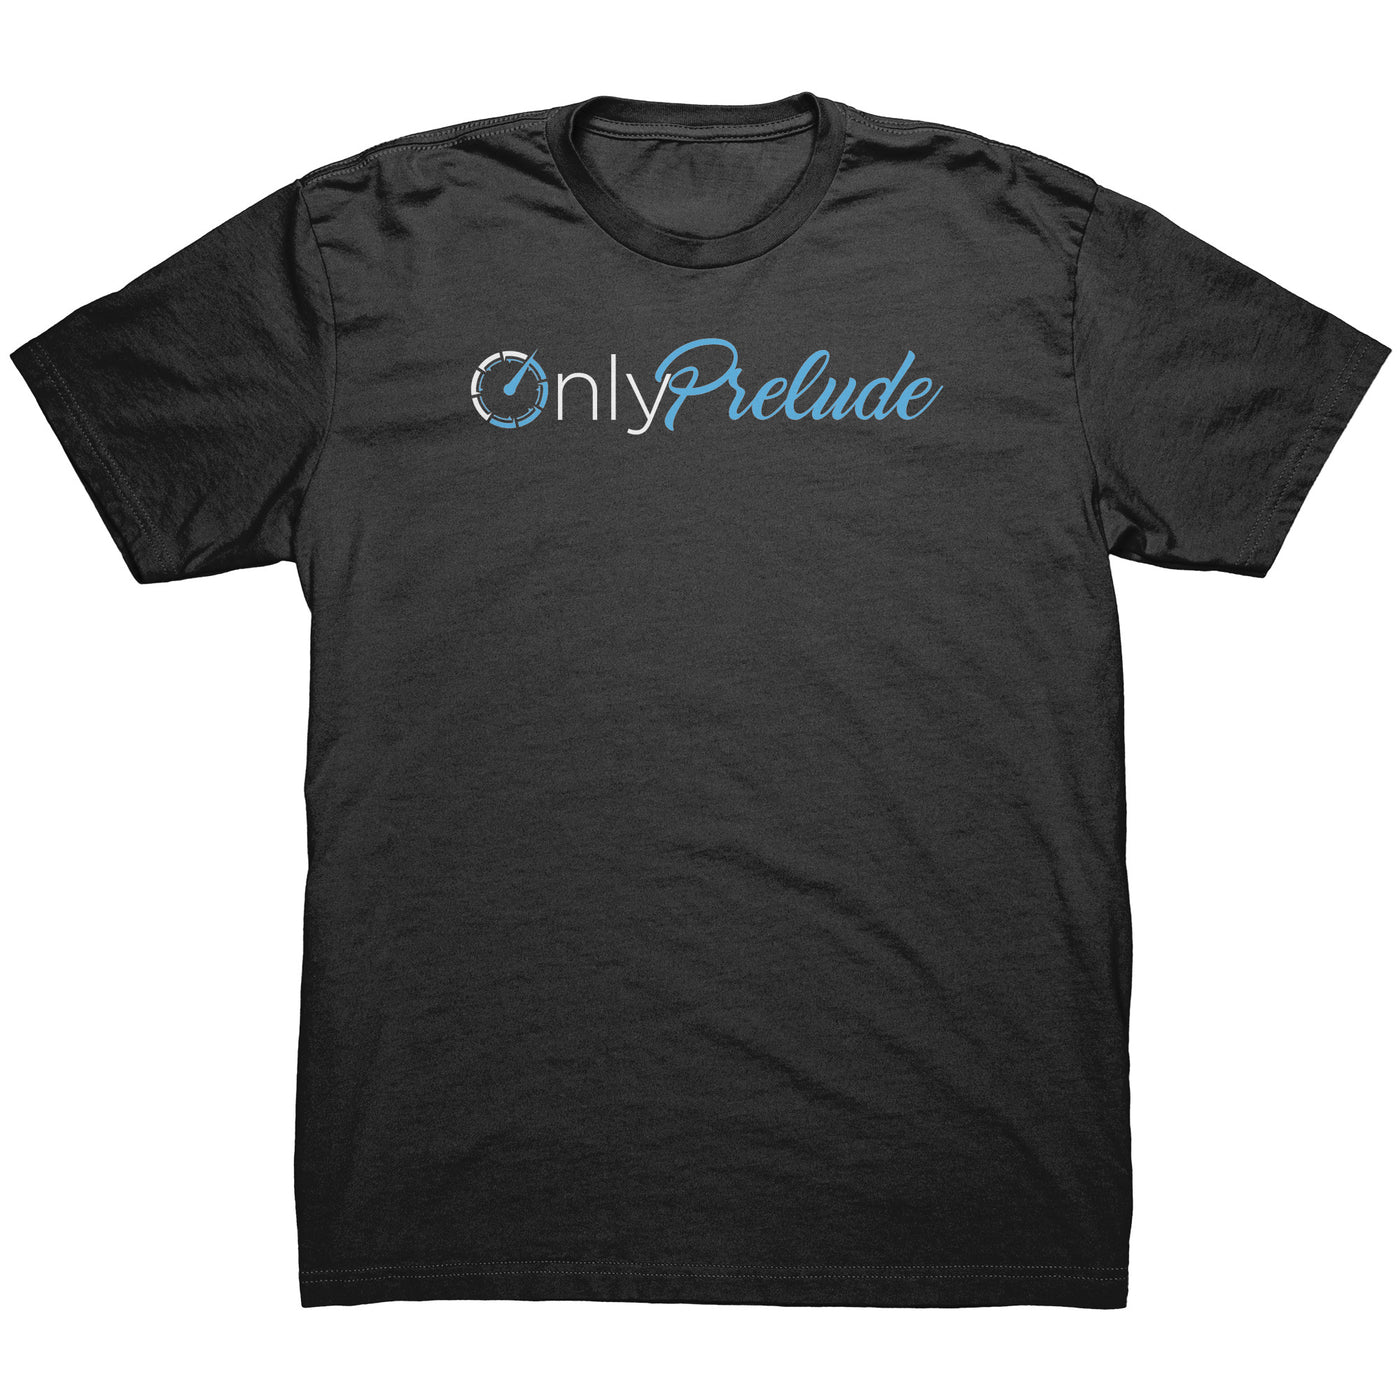 Only Prelude Shirt